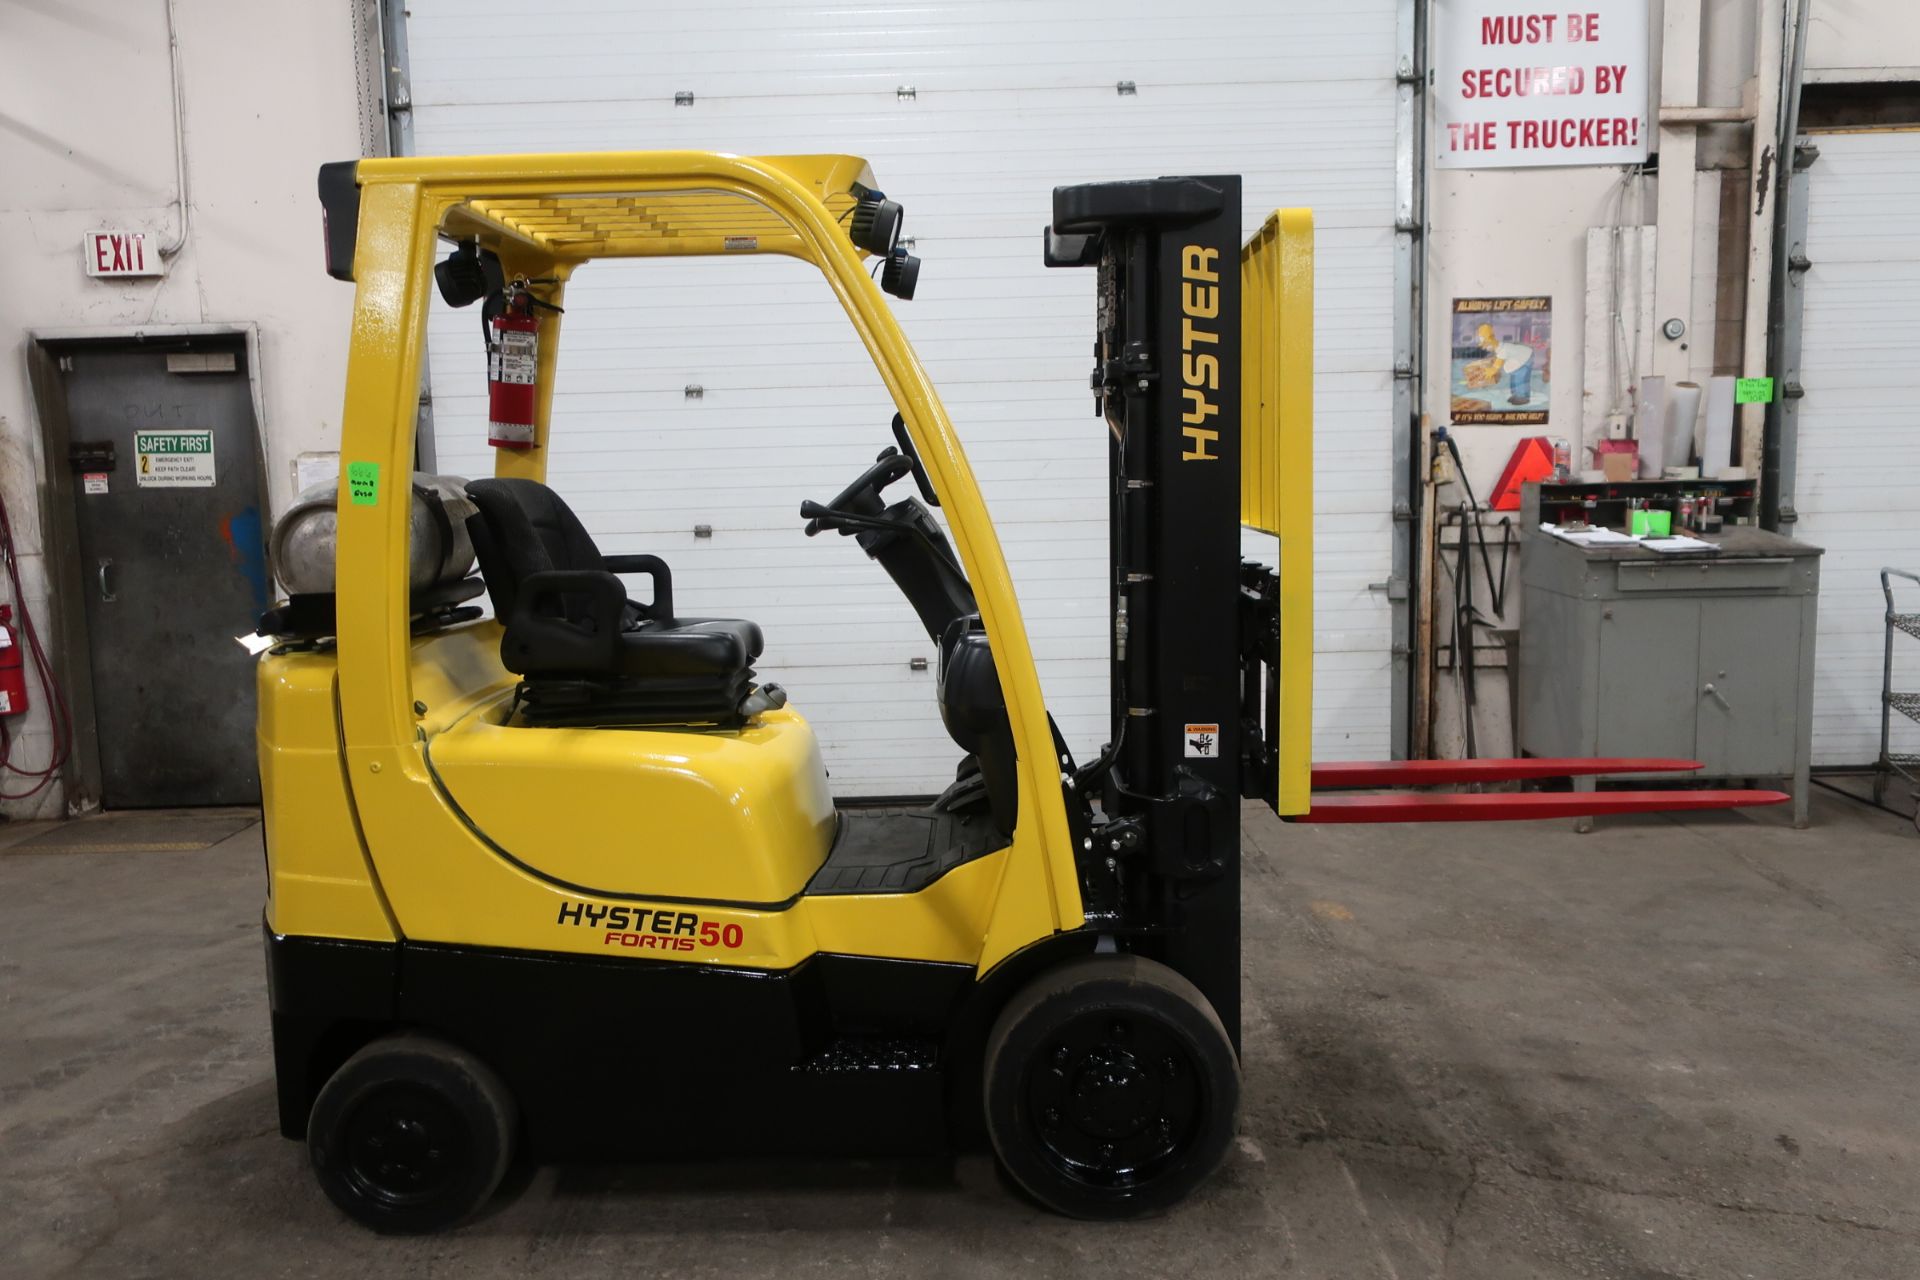 FREE CUSTOMS - 2012 Hyster 5000lbs Capacity Forklift with 3-stage mast - LPG (propane) with